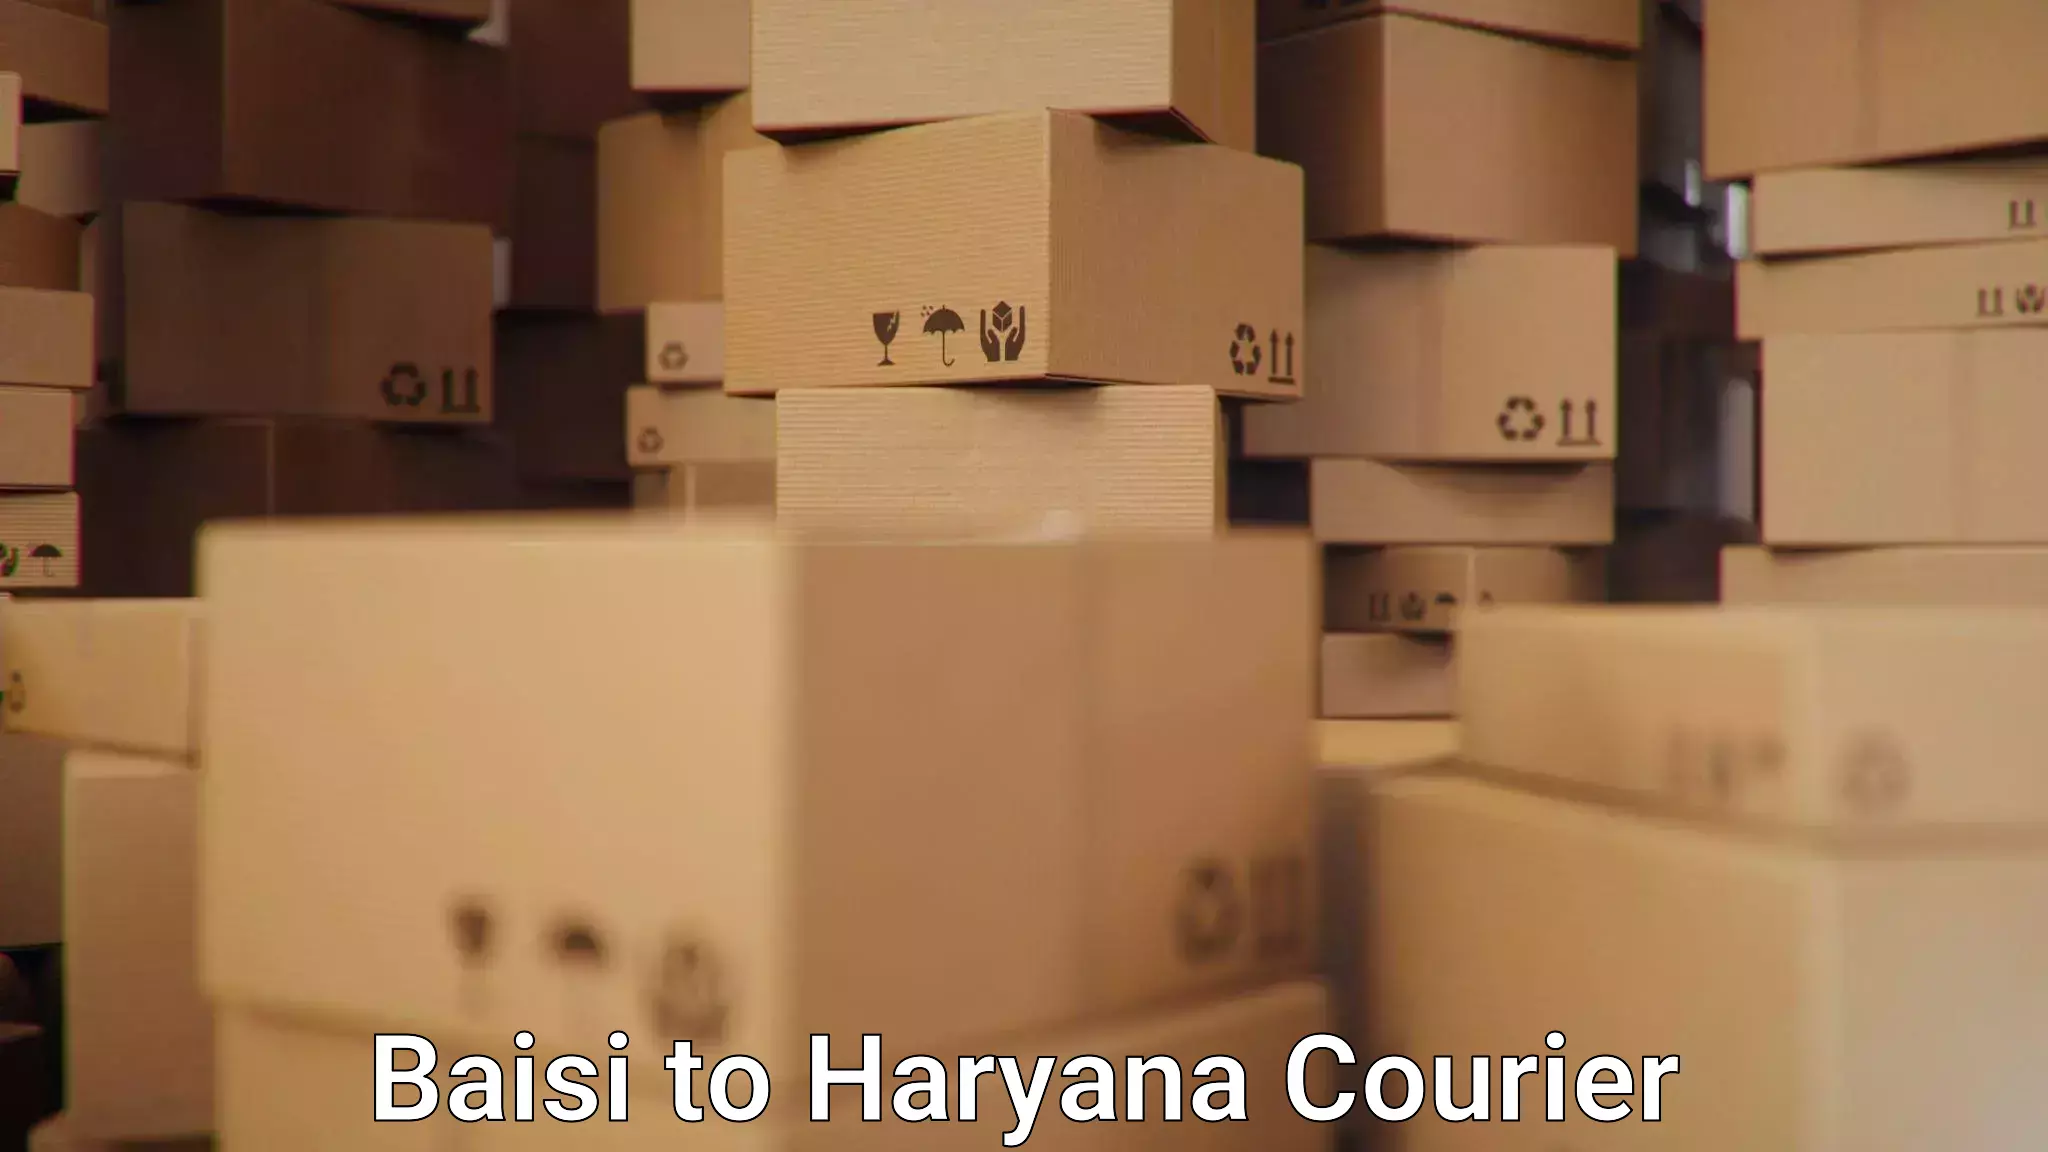 State-of-the-art courier technology Baisi to Haryana